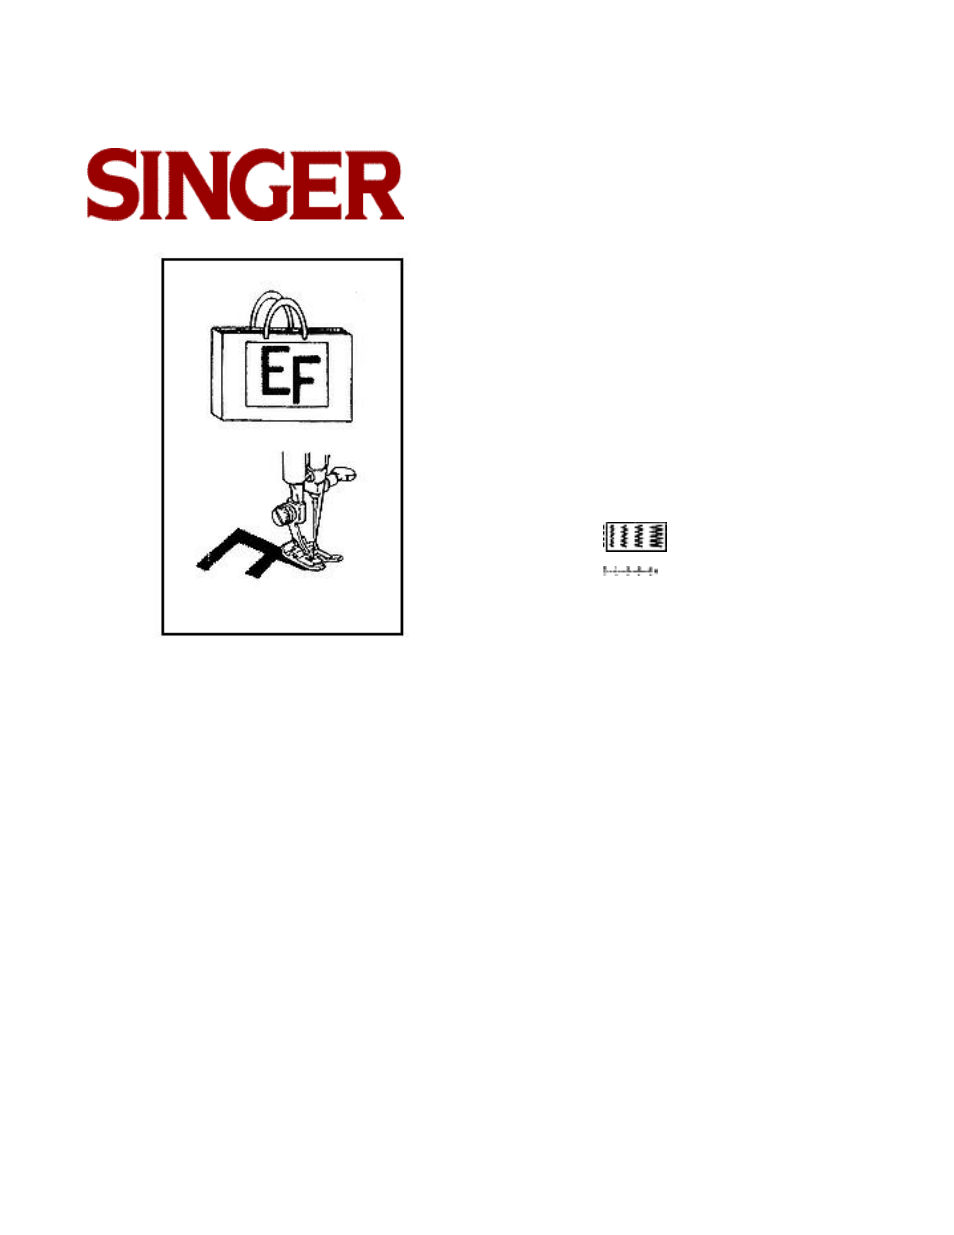 SINGER 18434 User Manual | Page 25 / 44 | Also for: 9027, 9026, 9022